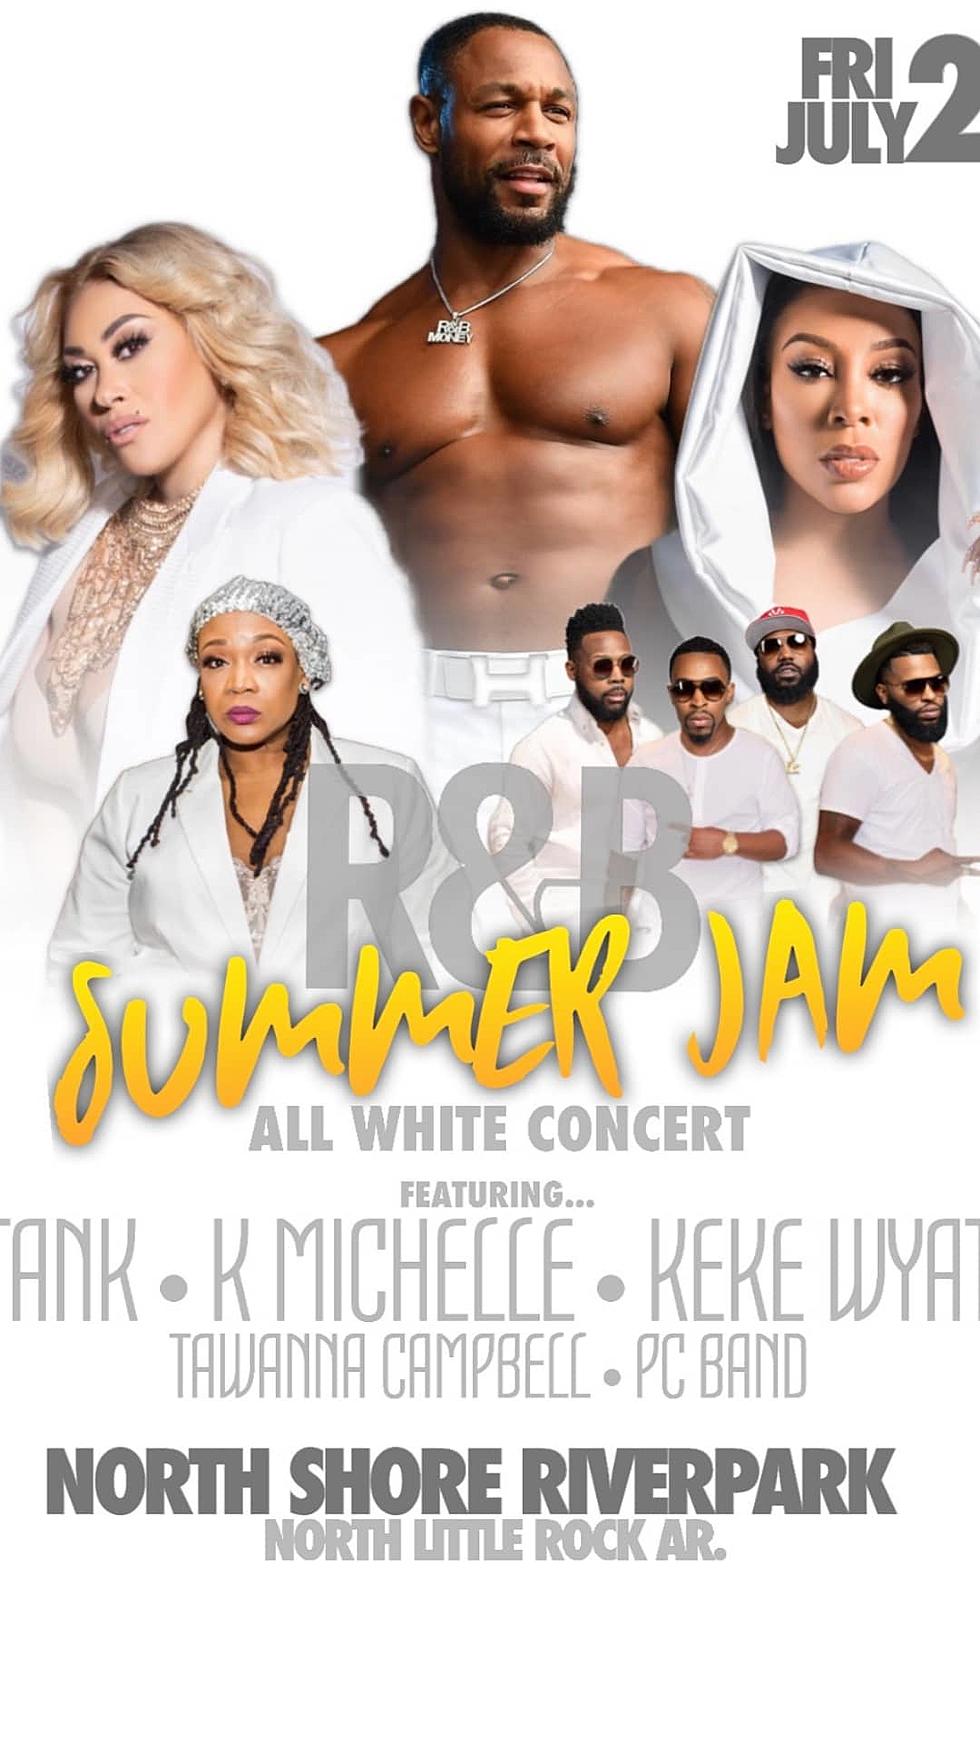 Here’s How To Win Tickets To See Tank, K. Michelle, & KeKe Wyatt